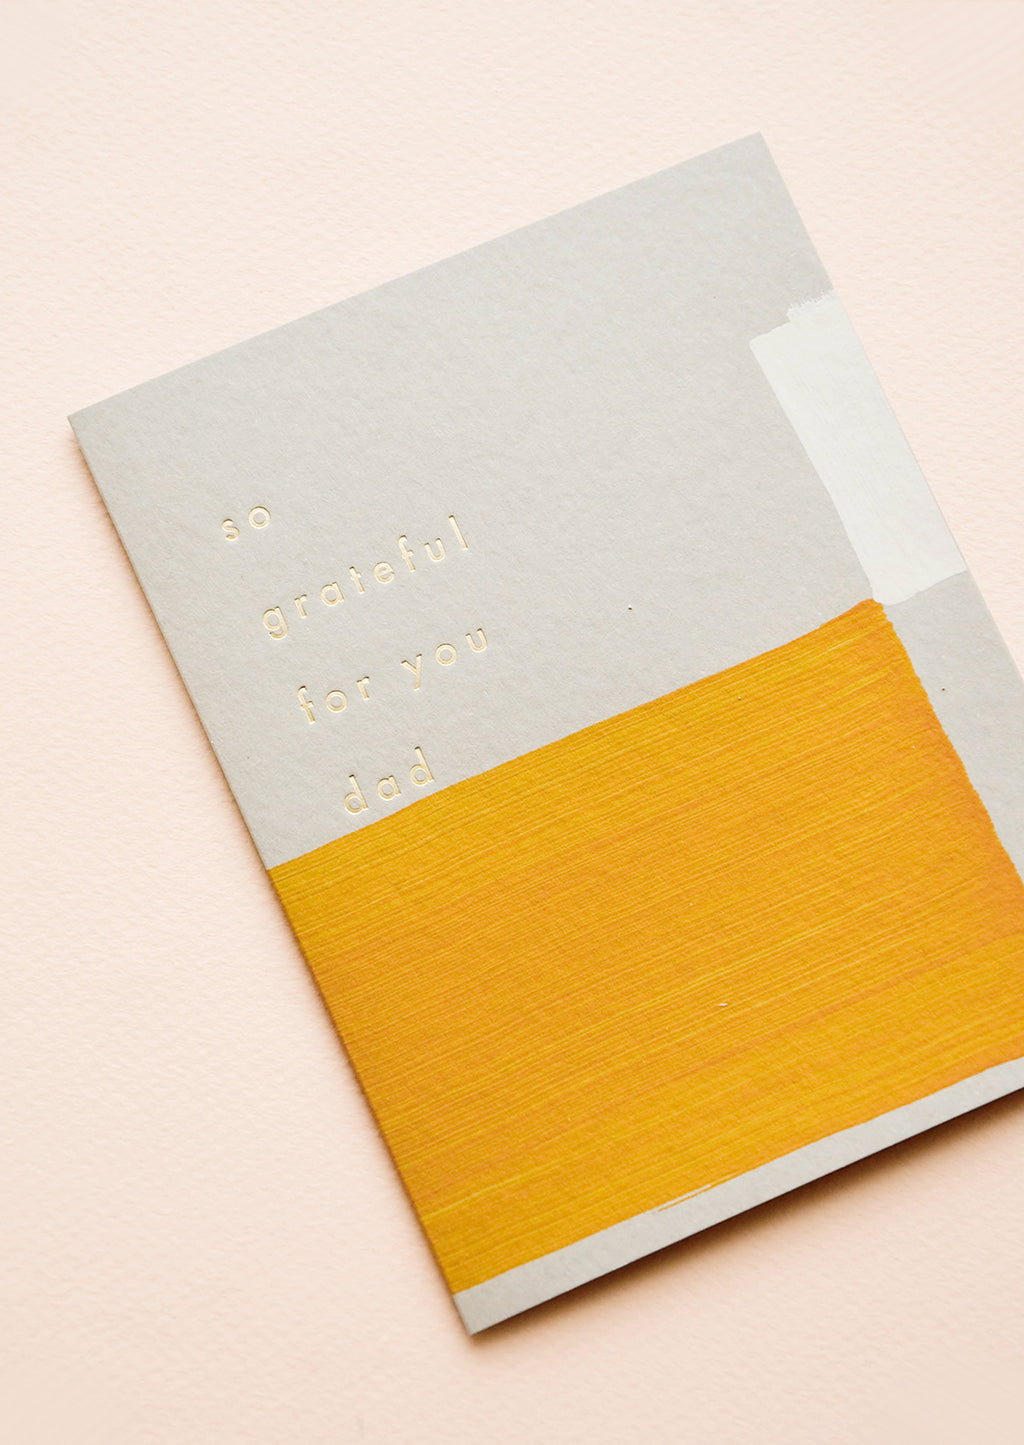 2: Greeting card with hand-painted square shapes in mustard and white, gold text reads "So grateful for you dad"